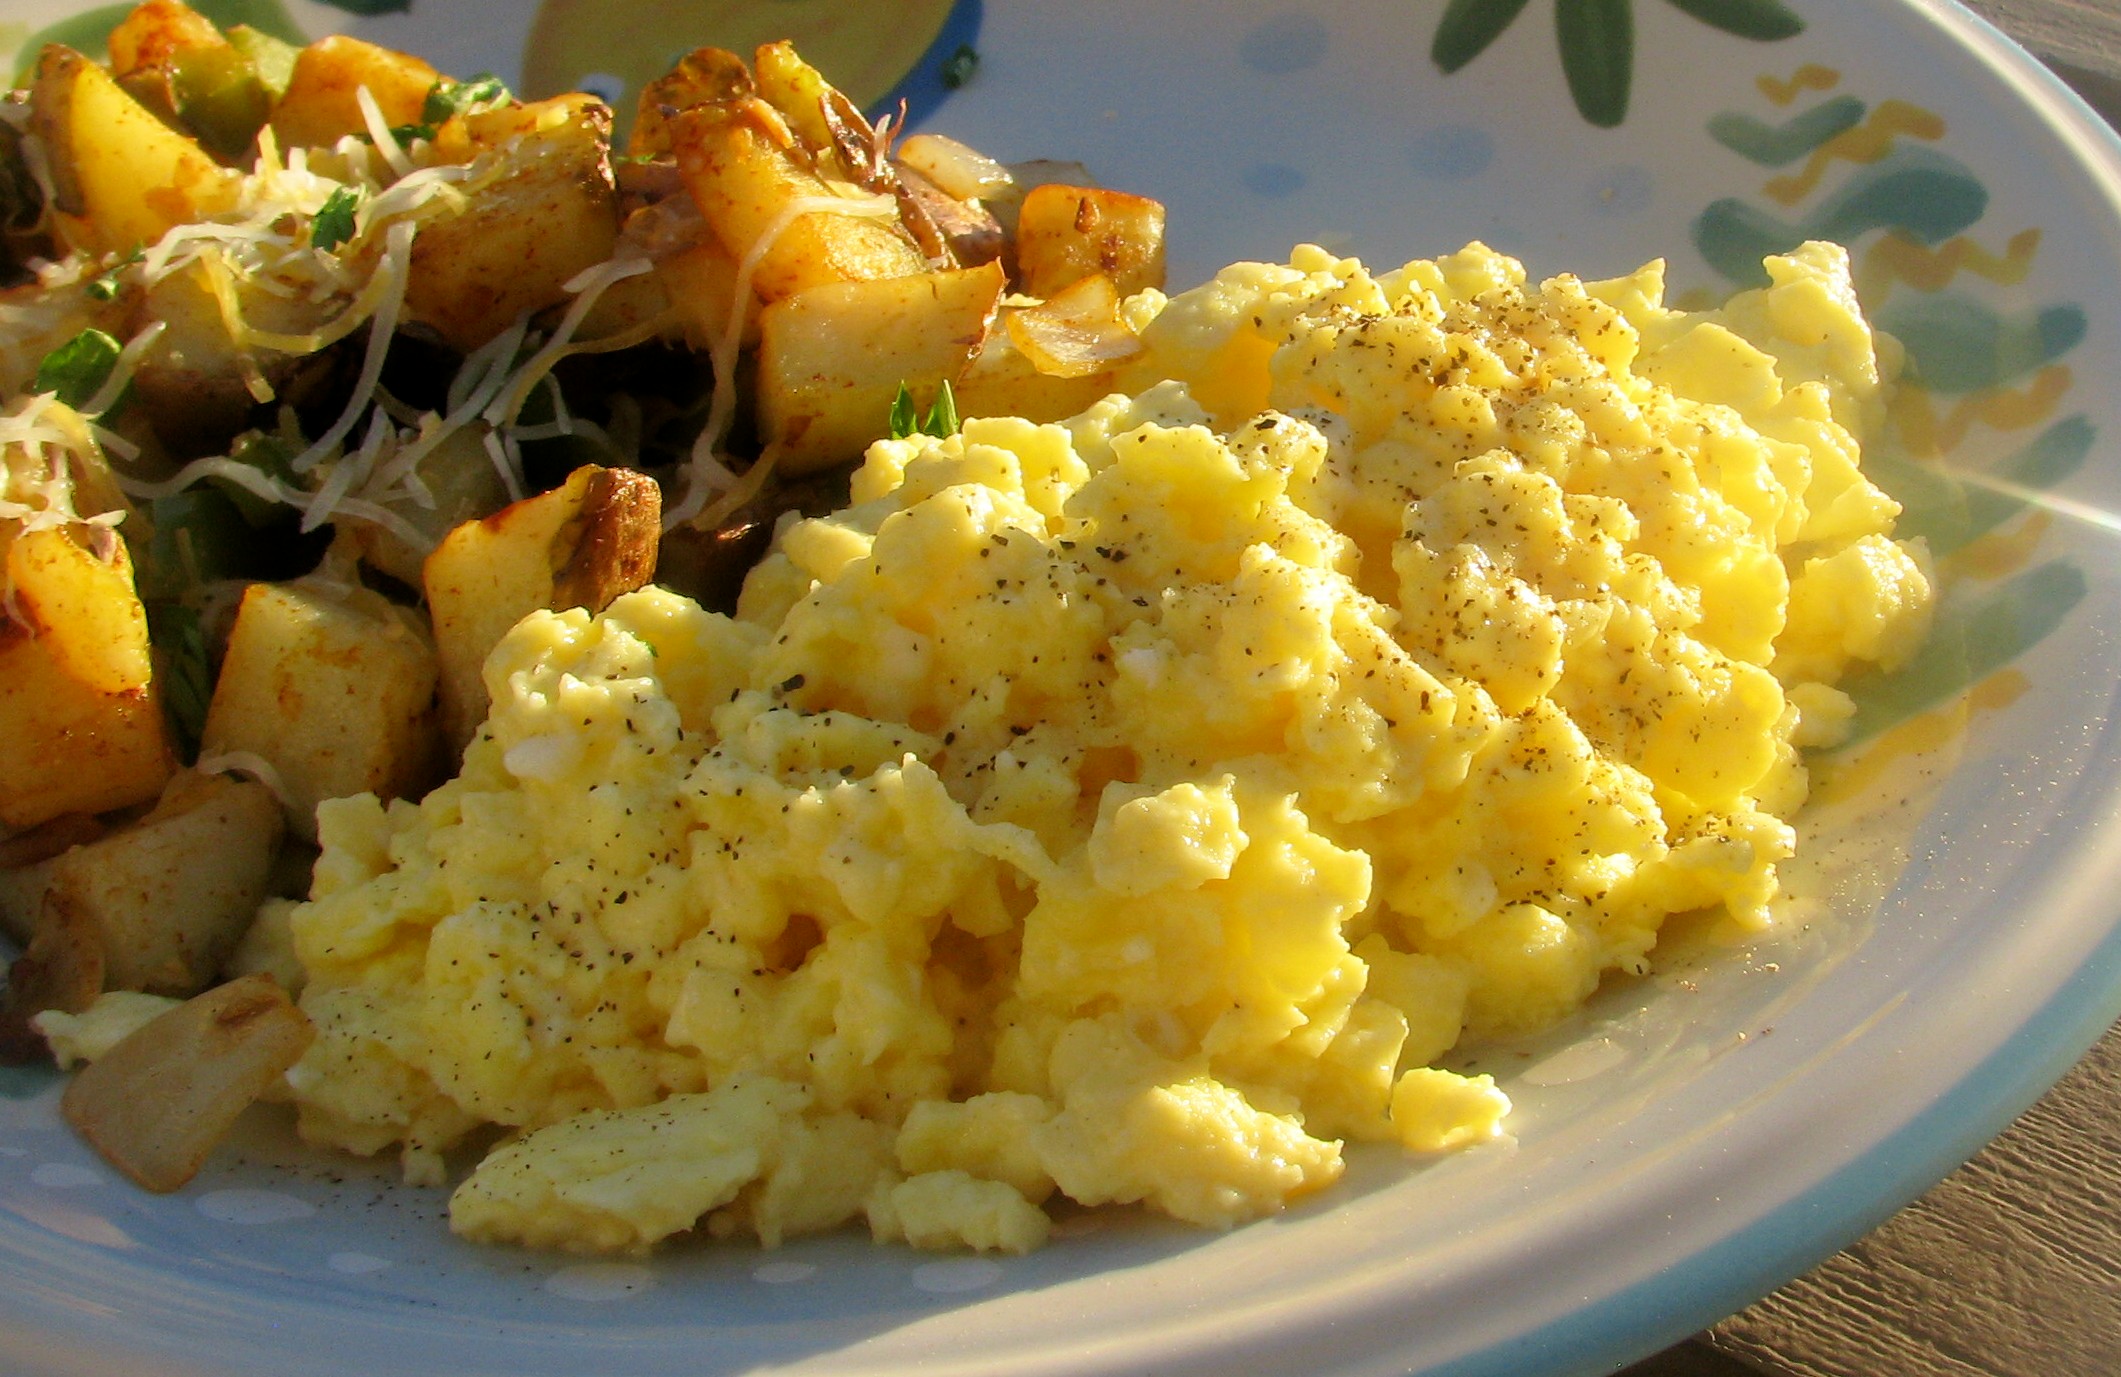 Creamy Scrambled Eggs With Dill and Smoked Salmon Recipe 